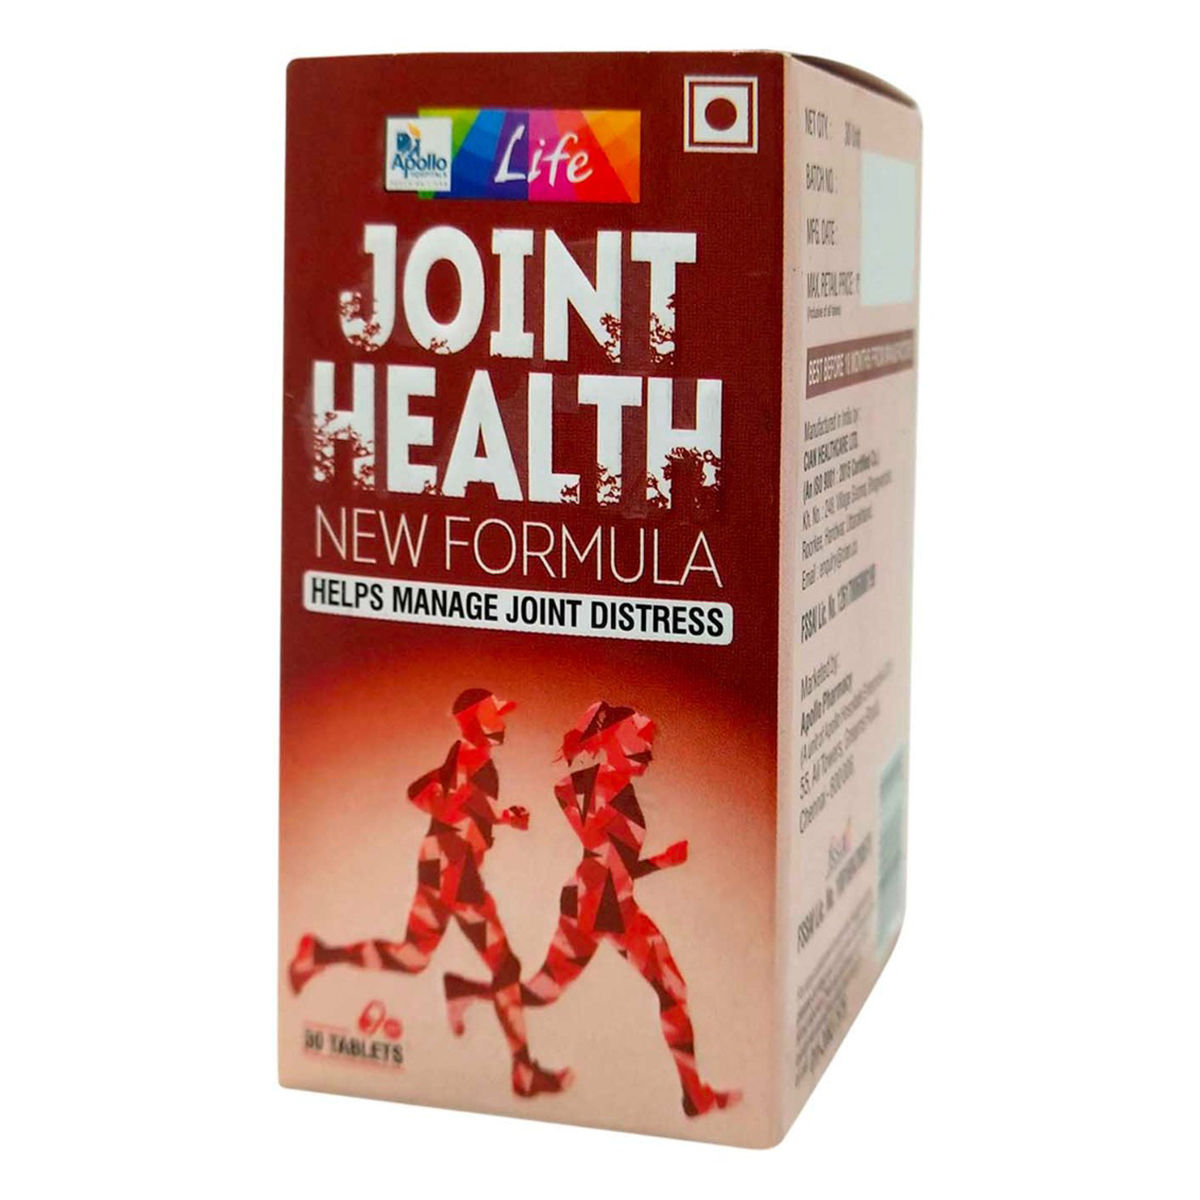 Buy Apollo Pharmacy Joint Health New Formula, 30 Tablets Online